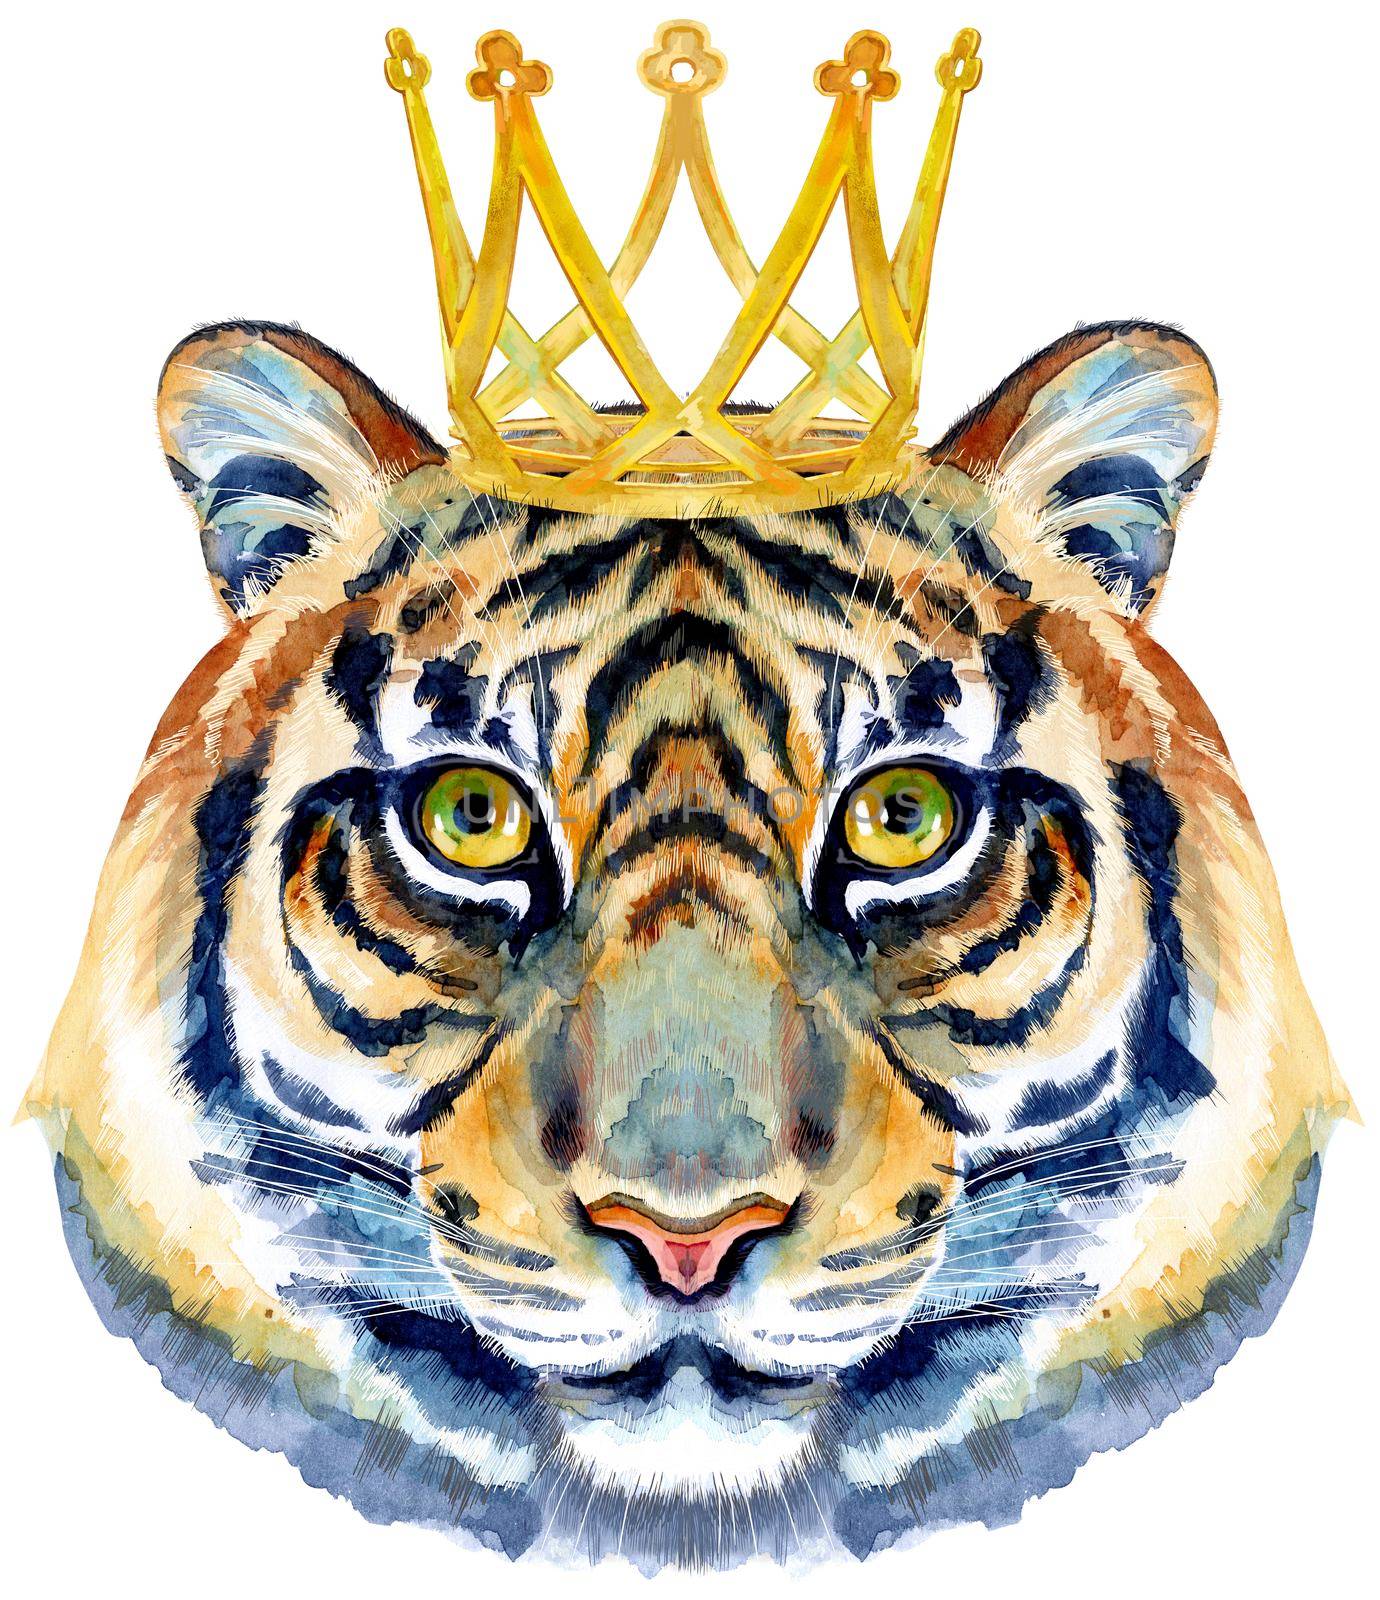 Tiger horoscope character watercolor illustration with golden crown isolated on white background. by NataOmsk